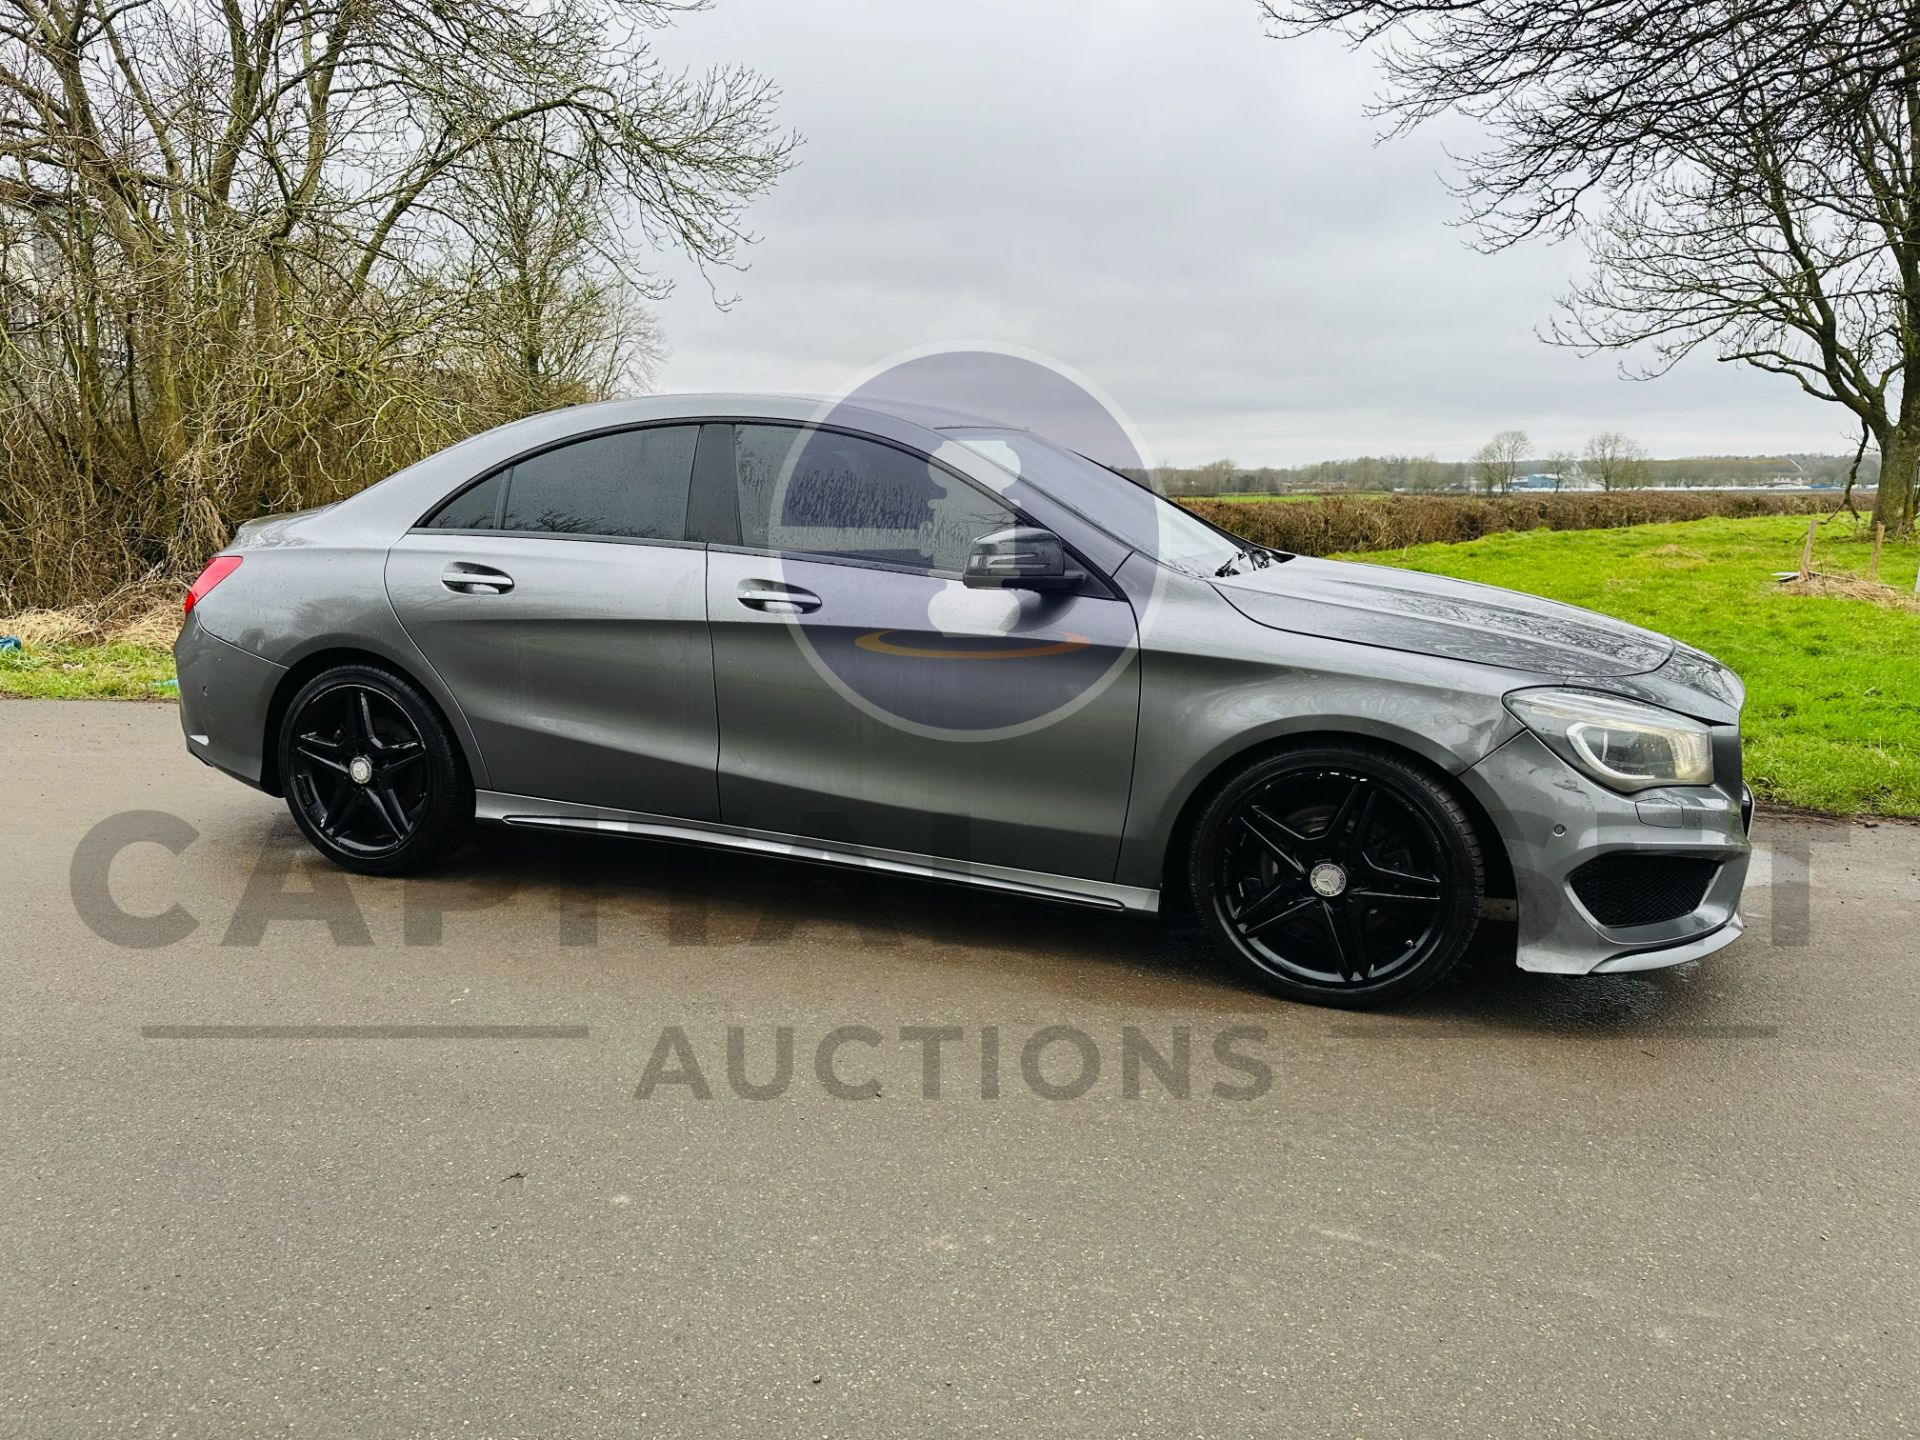 (ON SALE) MERCEDES-BENZ CLA 220 CDI *AMG SPORT* (7G - DCT AUTOMATIC) - 2015 MODEL - SERVICE HISTORY